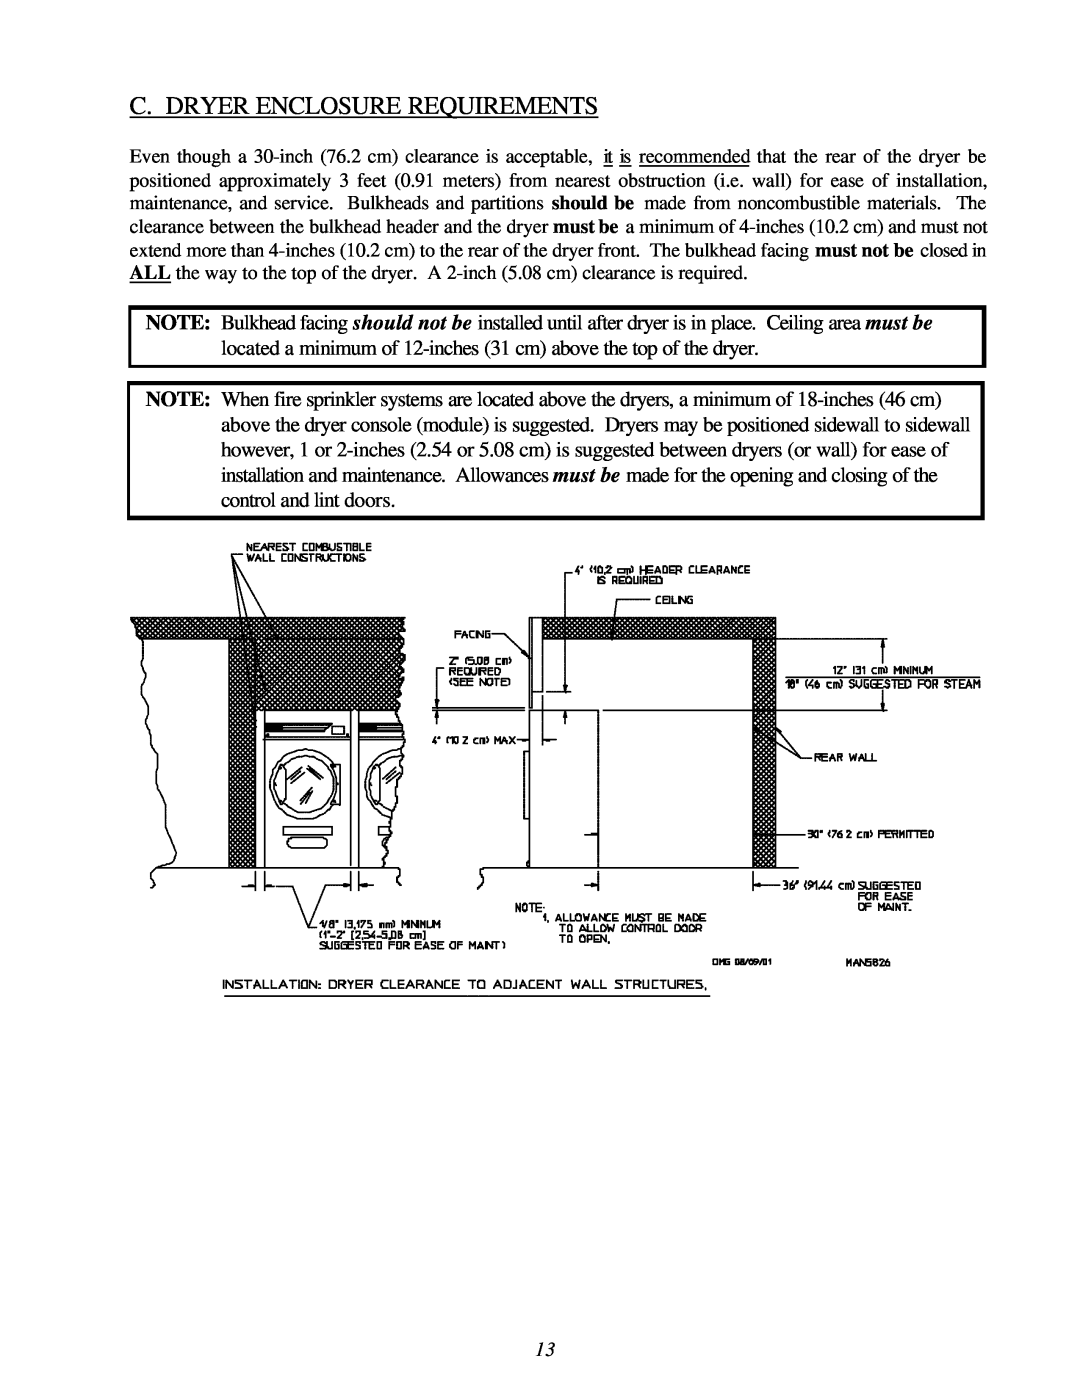 American Dryer Corp ML-122D installation manual C. Dryer Enclosure Requirements 